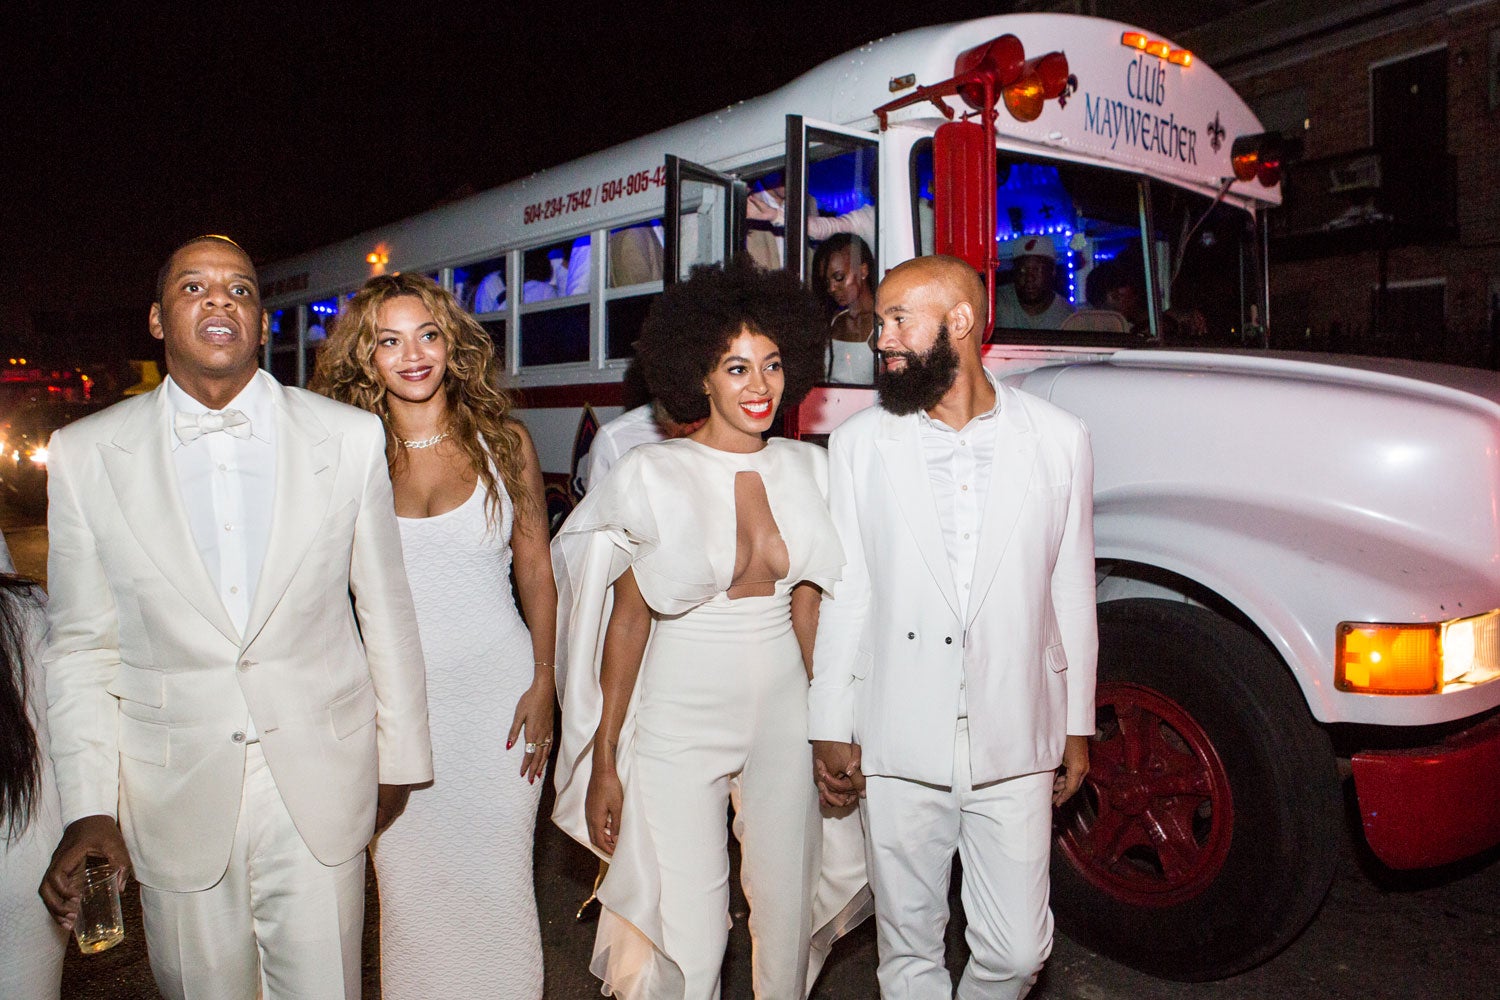 27 Times Solange Showed Us She Has the Coolest Life Ever